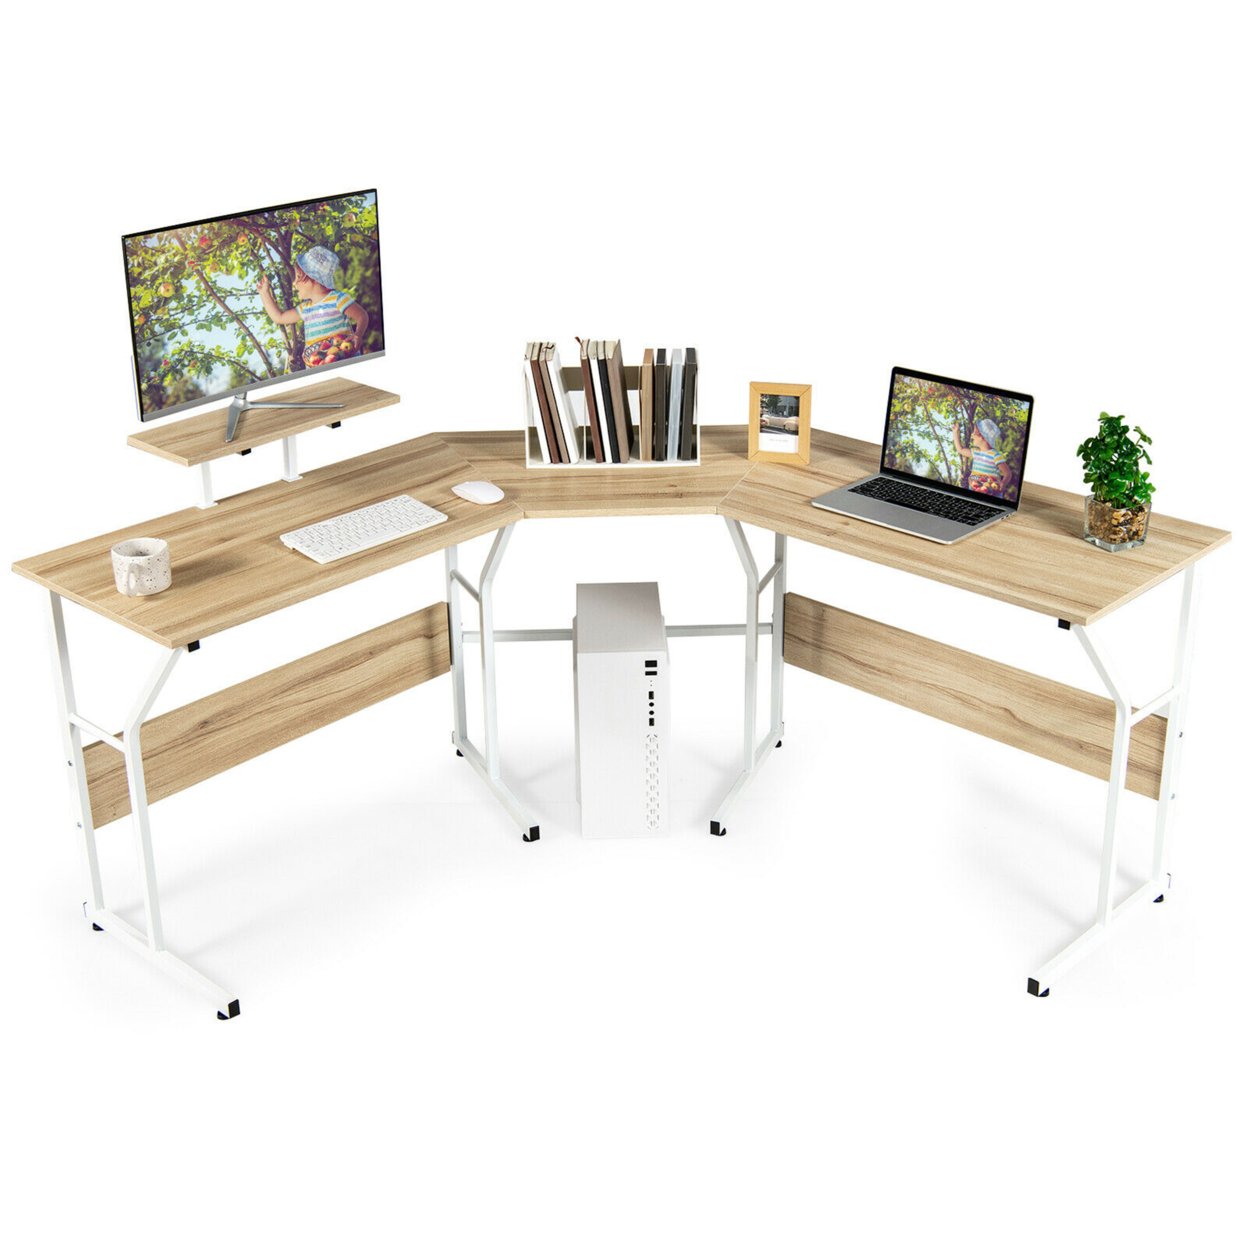 88.5'' L Shaped Reversible Computer Desk 2 Person Long Table Monitor Stand - Oak